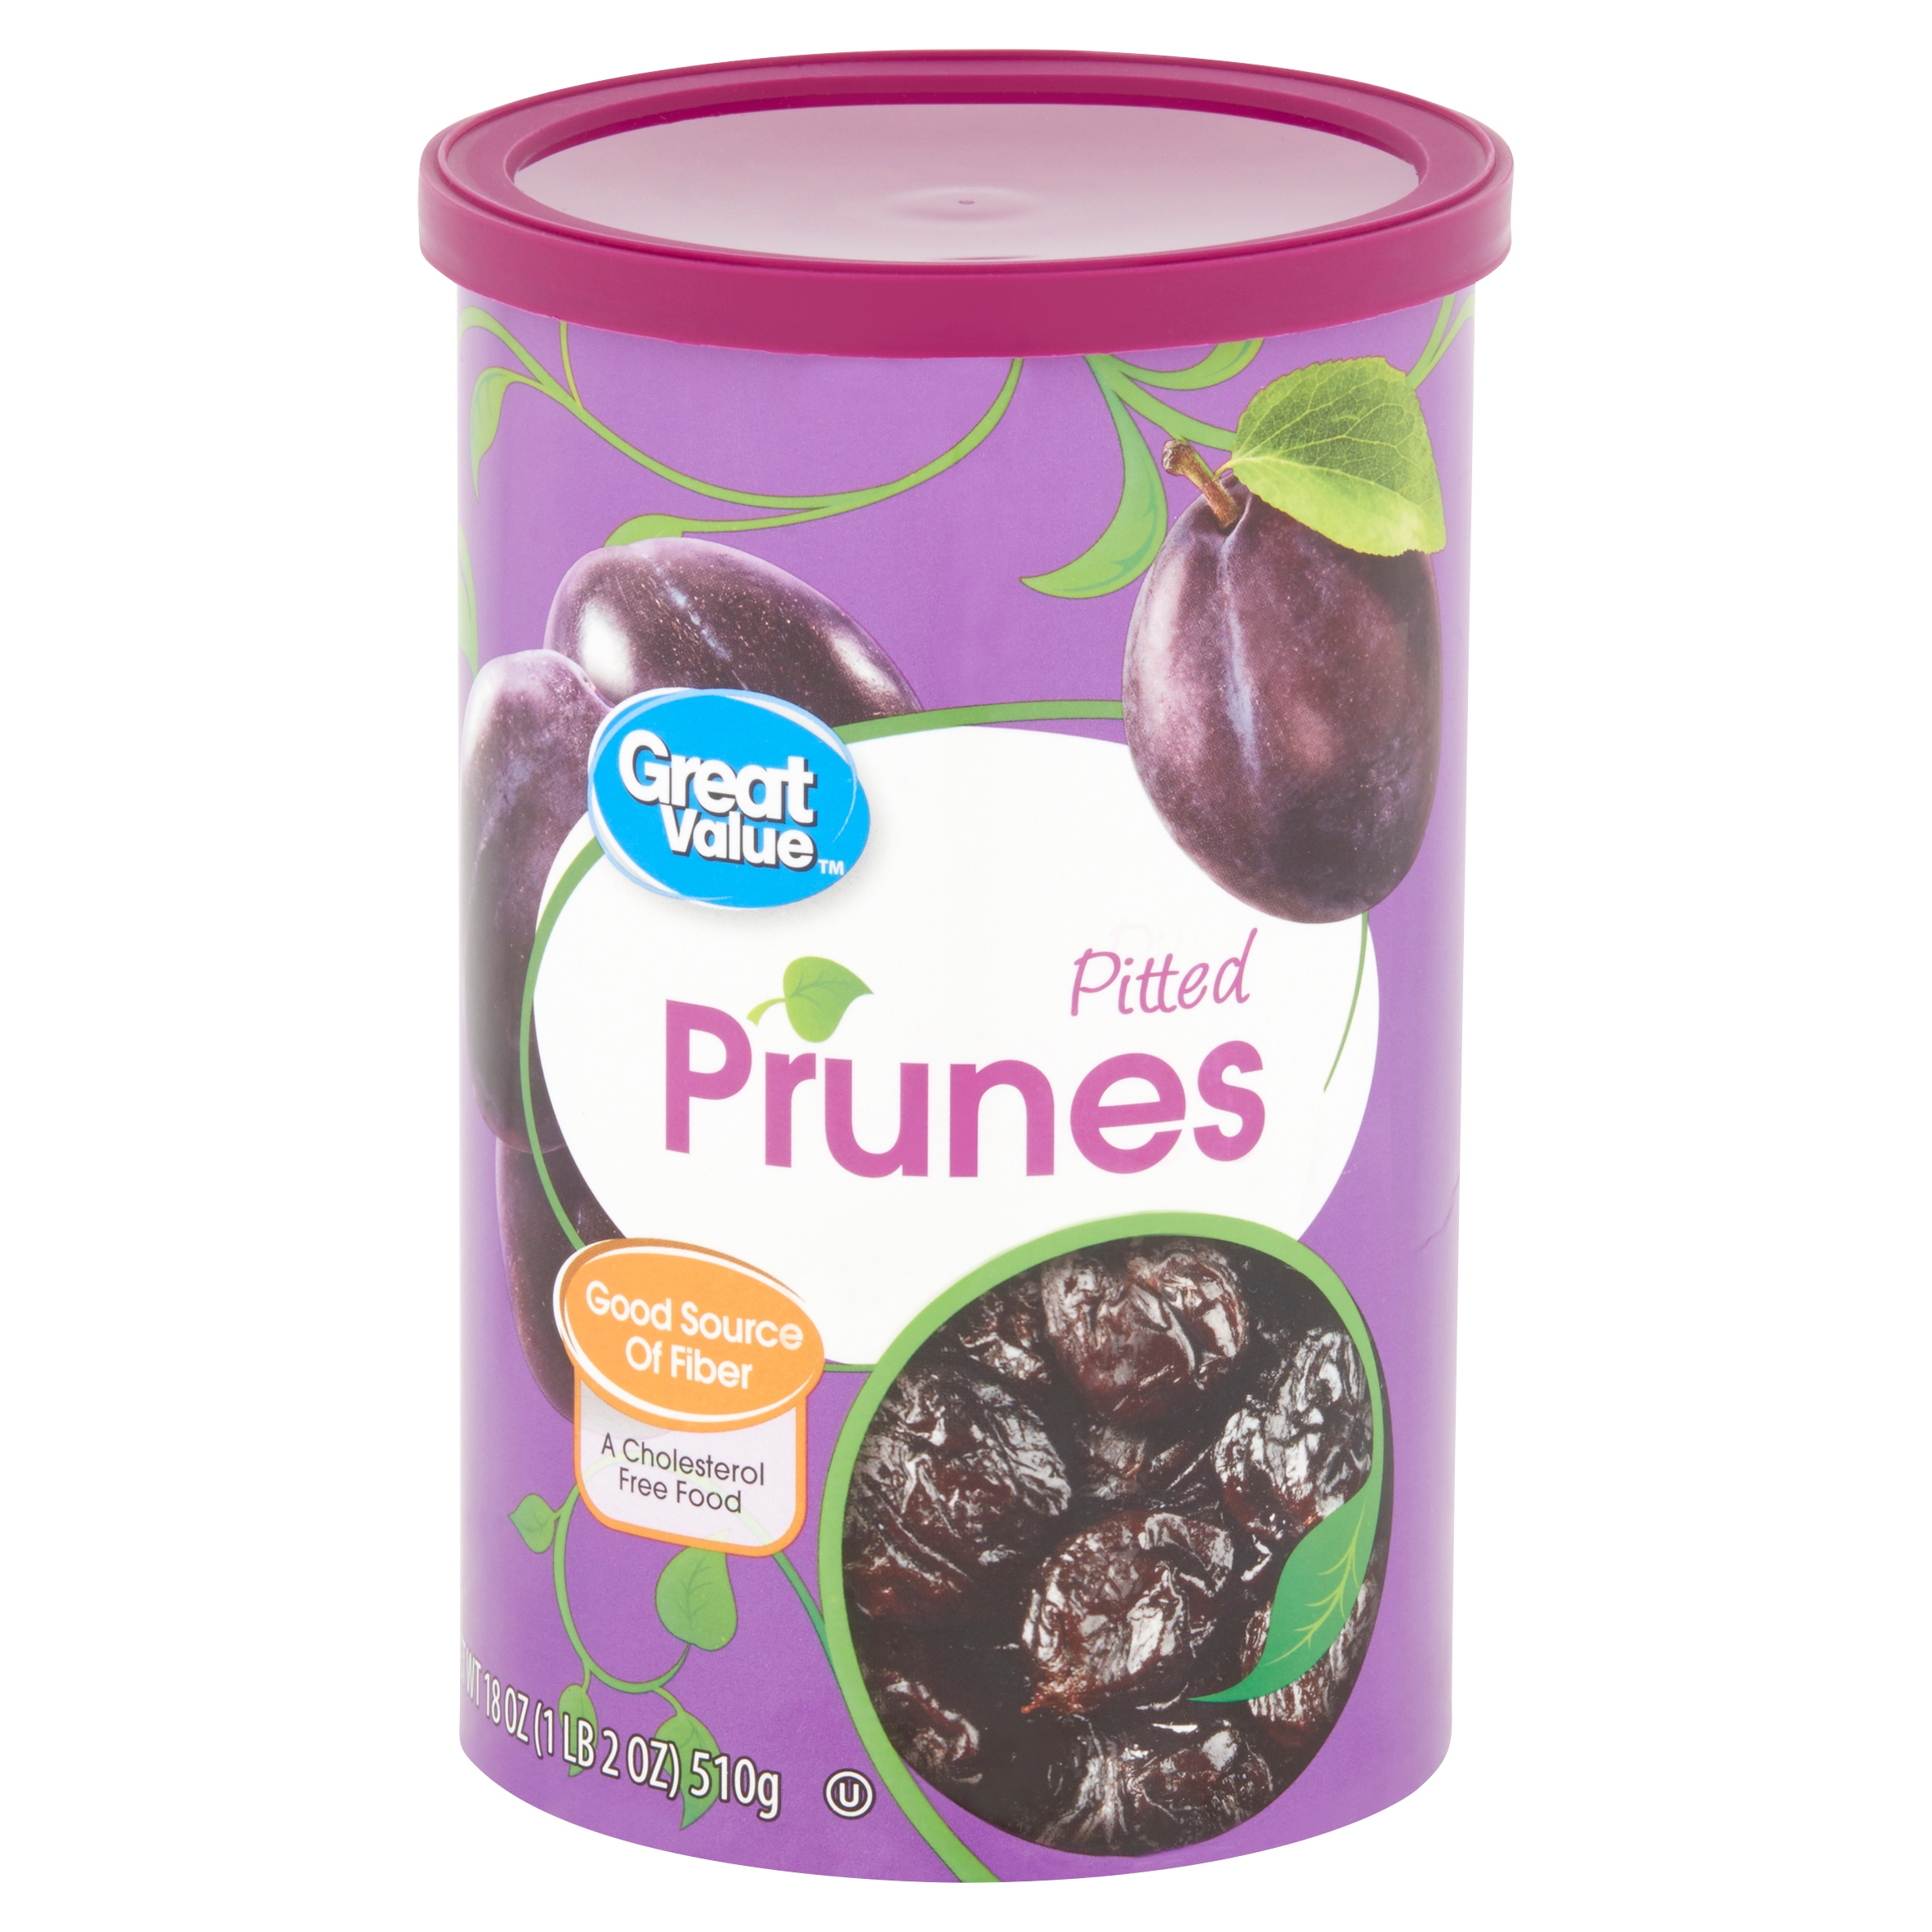 Great Value Dried Prunes, Pitted, 18 Oz Image